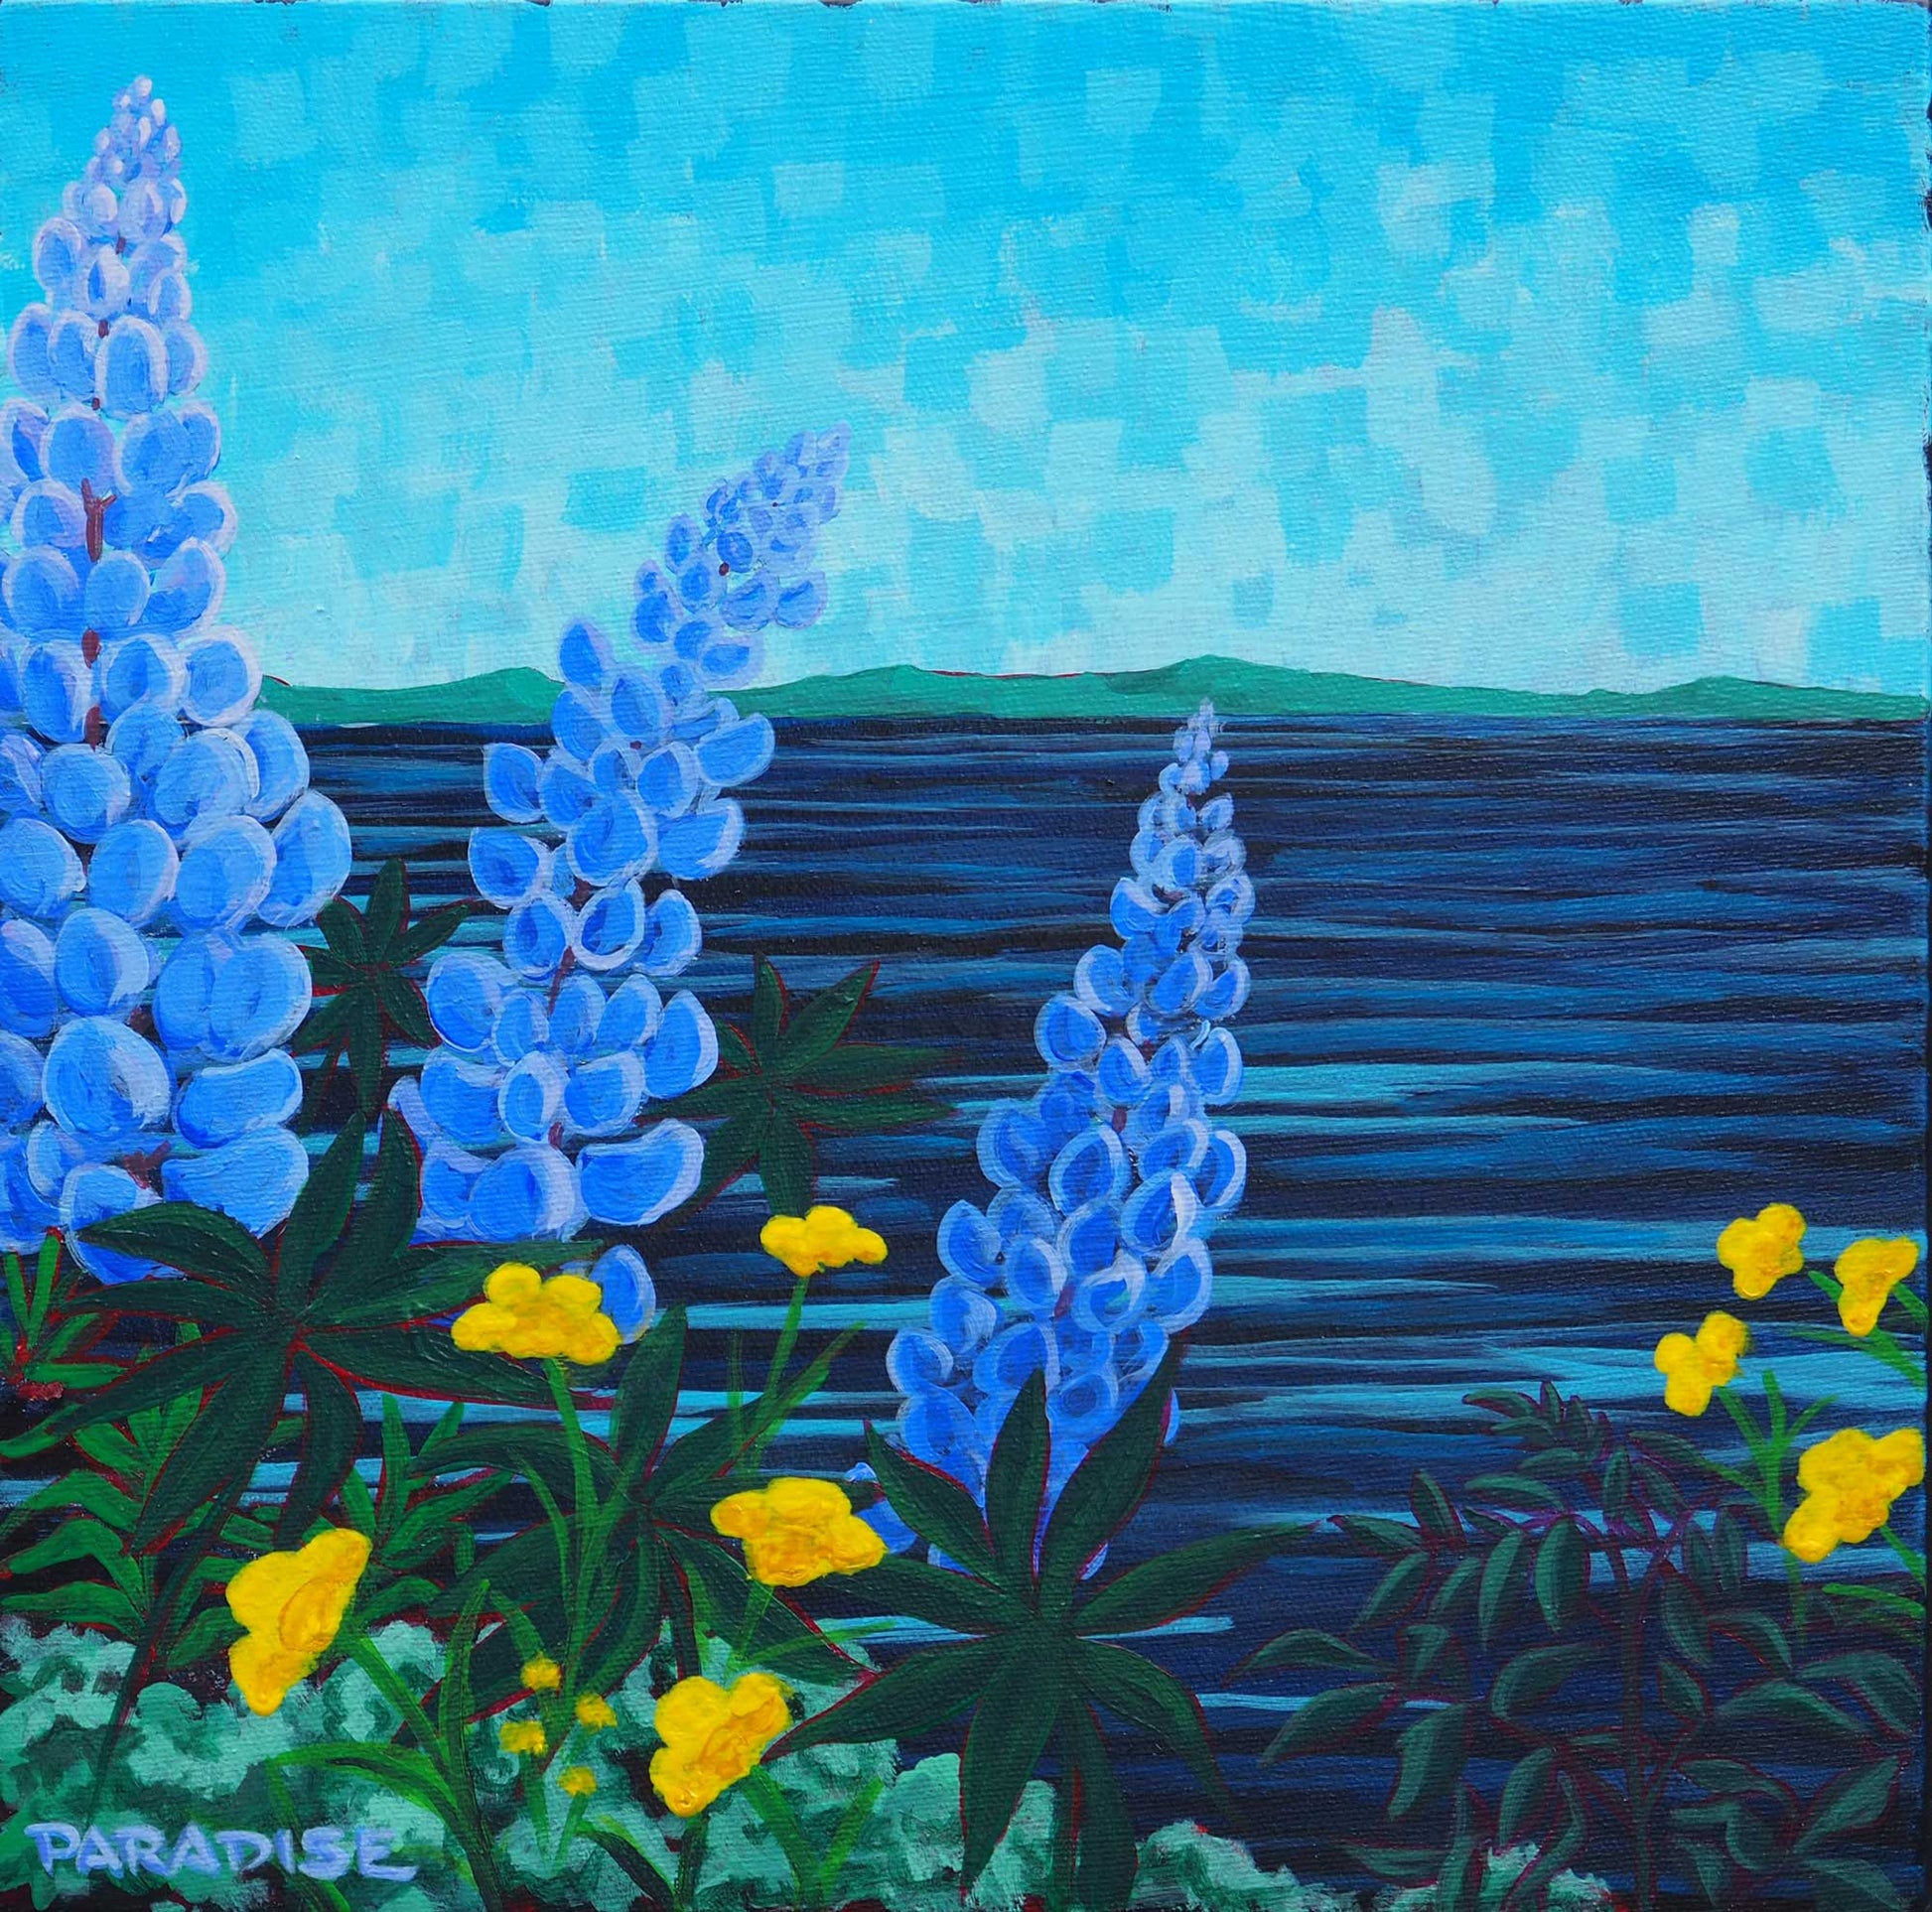 Lupin season in the Maritime region nova scotia on the Atlantic Ocean. blue vibrant sky original painting by a professional Canadian landscape artist. visual art ready to hang on your wall.